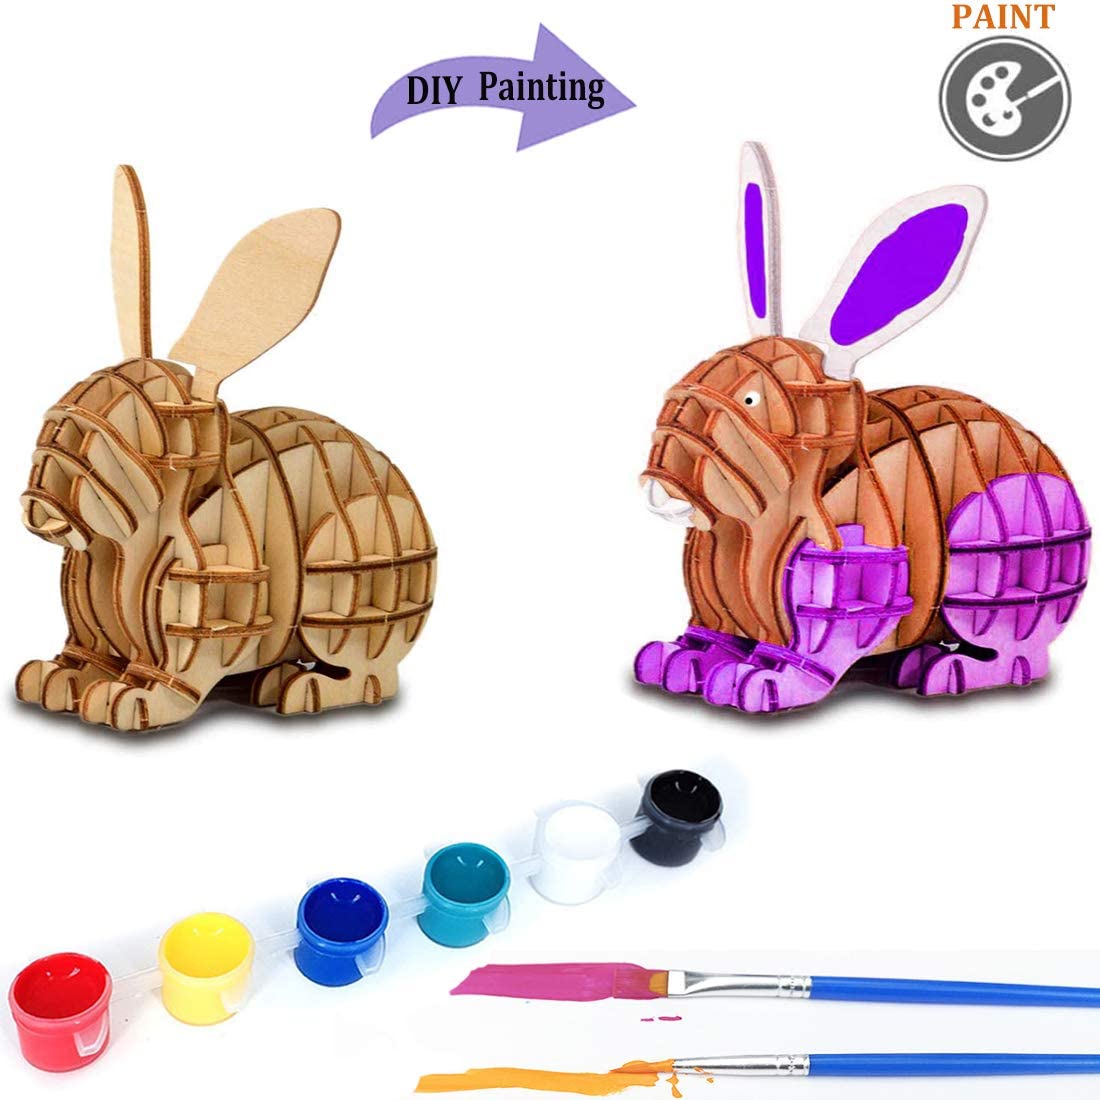 3D Wooden Puzzle Toys for Kids Adults Wooden Animal Rabbit Model Puzzle, Mechanical Puzzles Jigsaw Puzzle Toys Model Kits Assemble Puzzle Educational Toys Gifts for Kids Adults Boys Girls - image 2 of 9